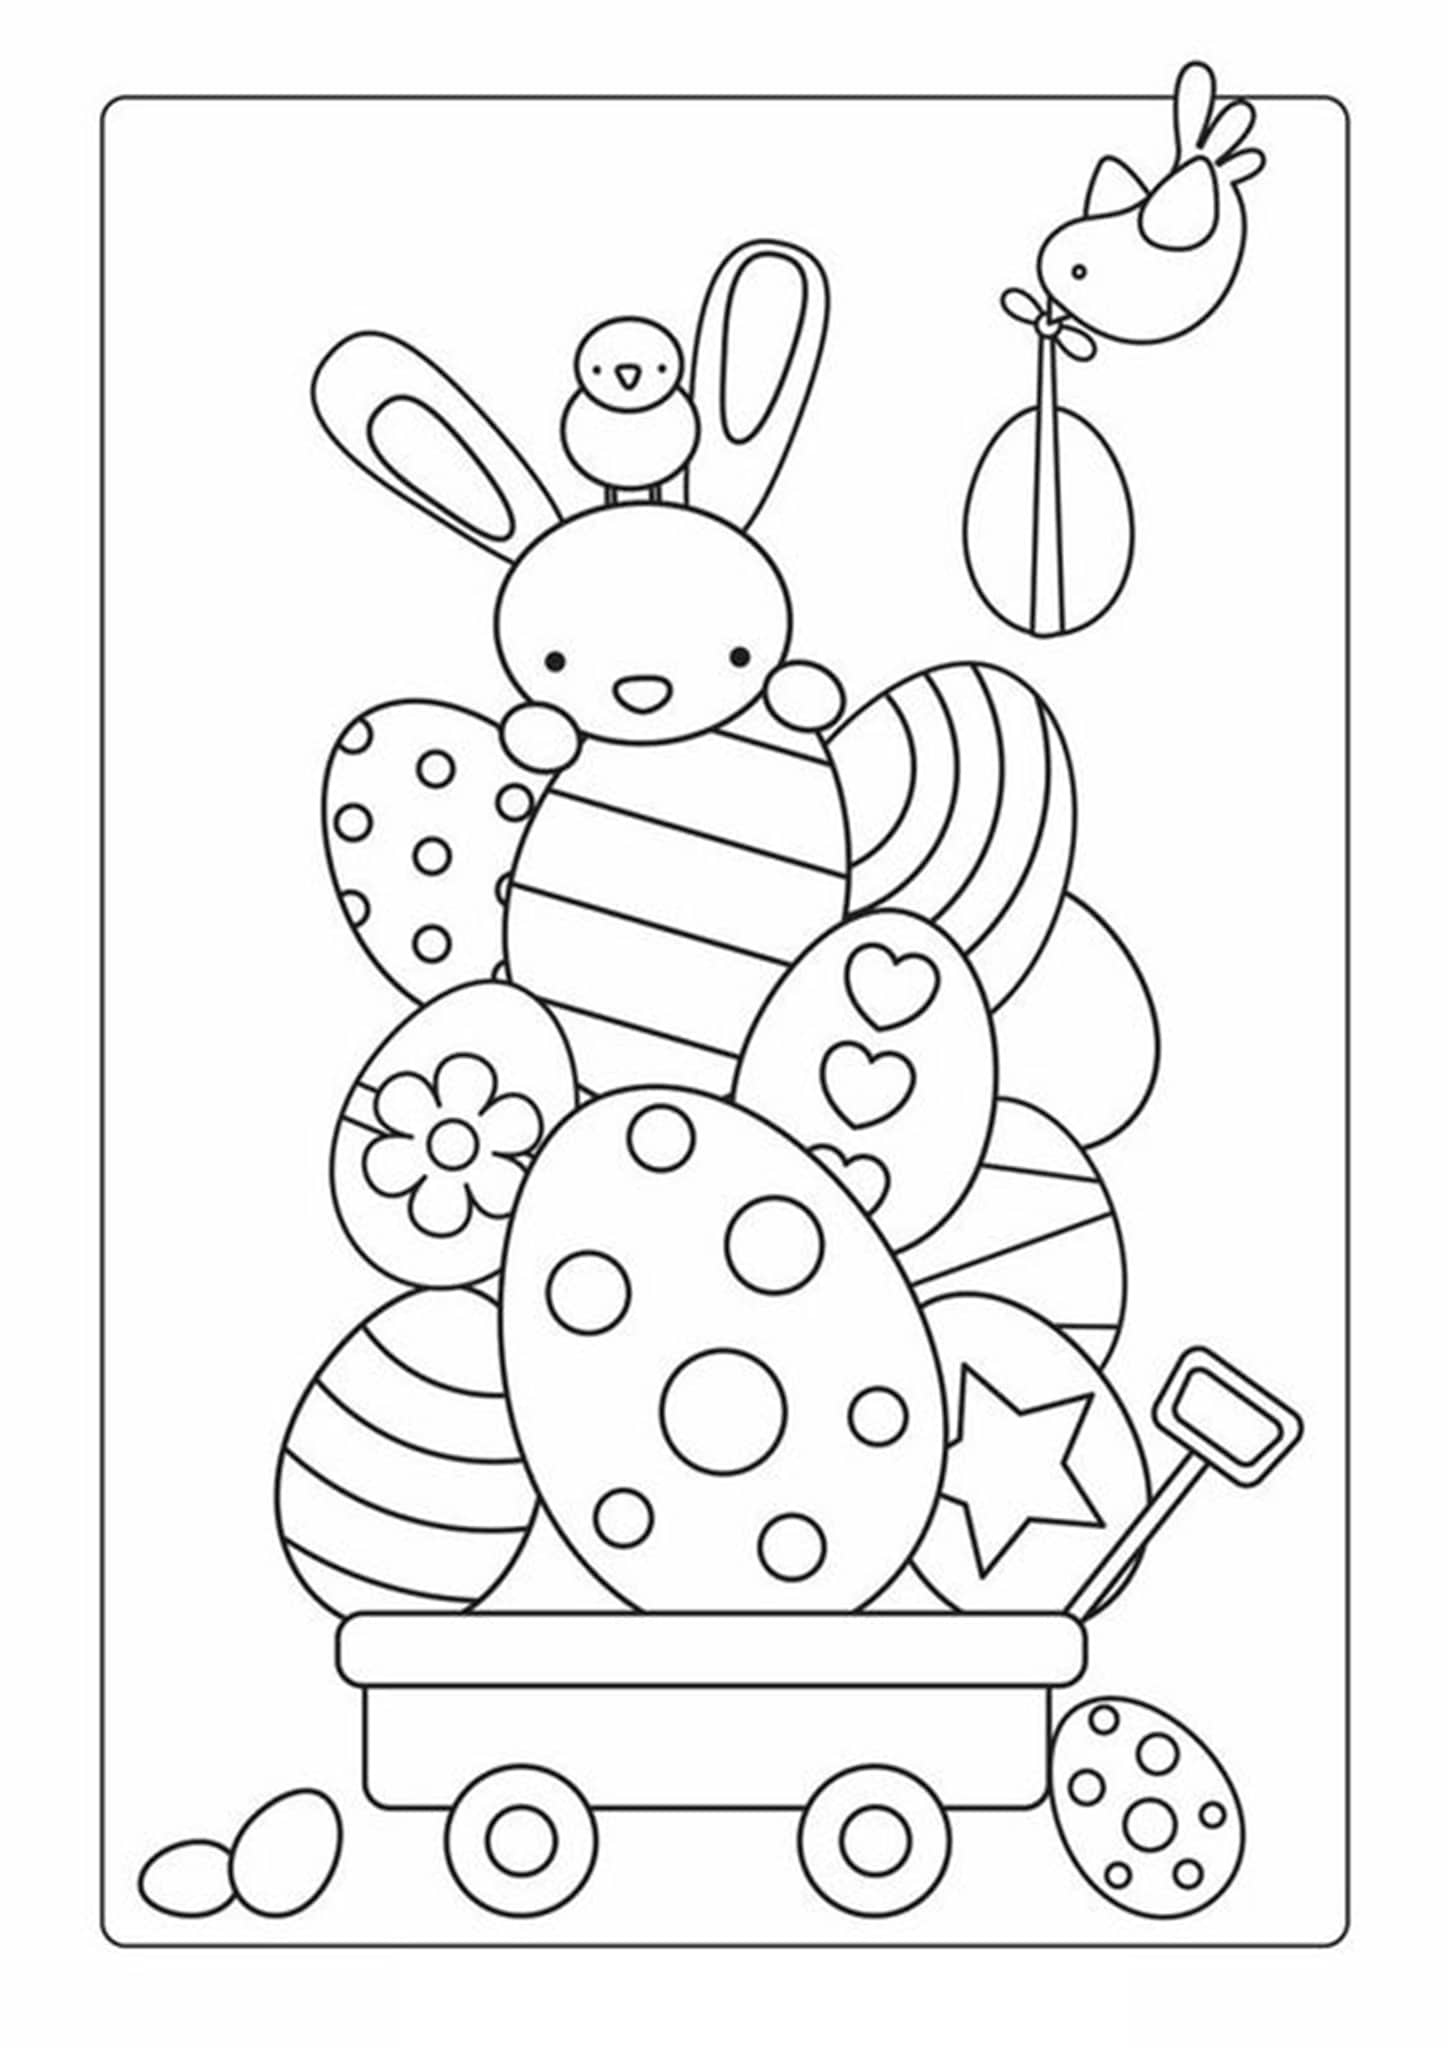 Download Free & Easy To Print Bunny Coloring Pages - Tulamama